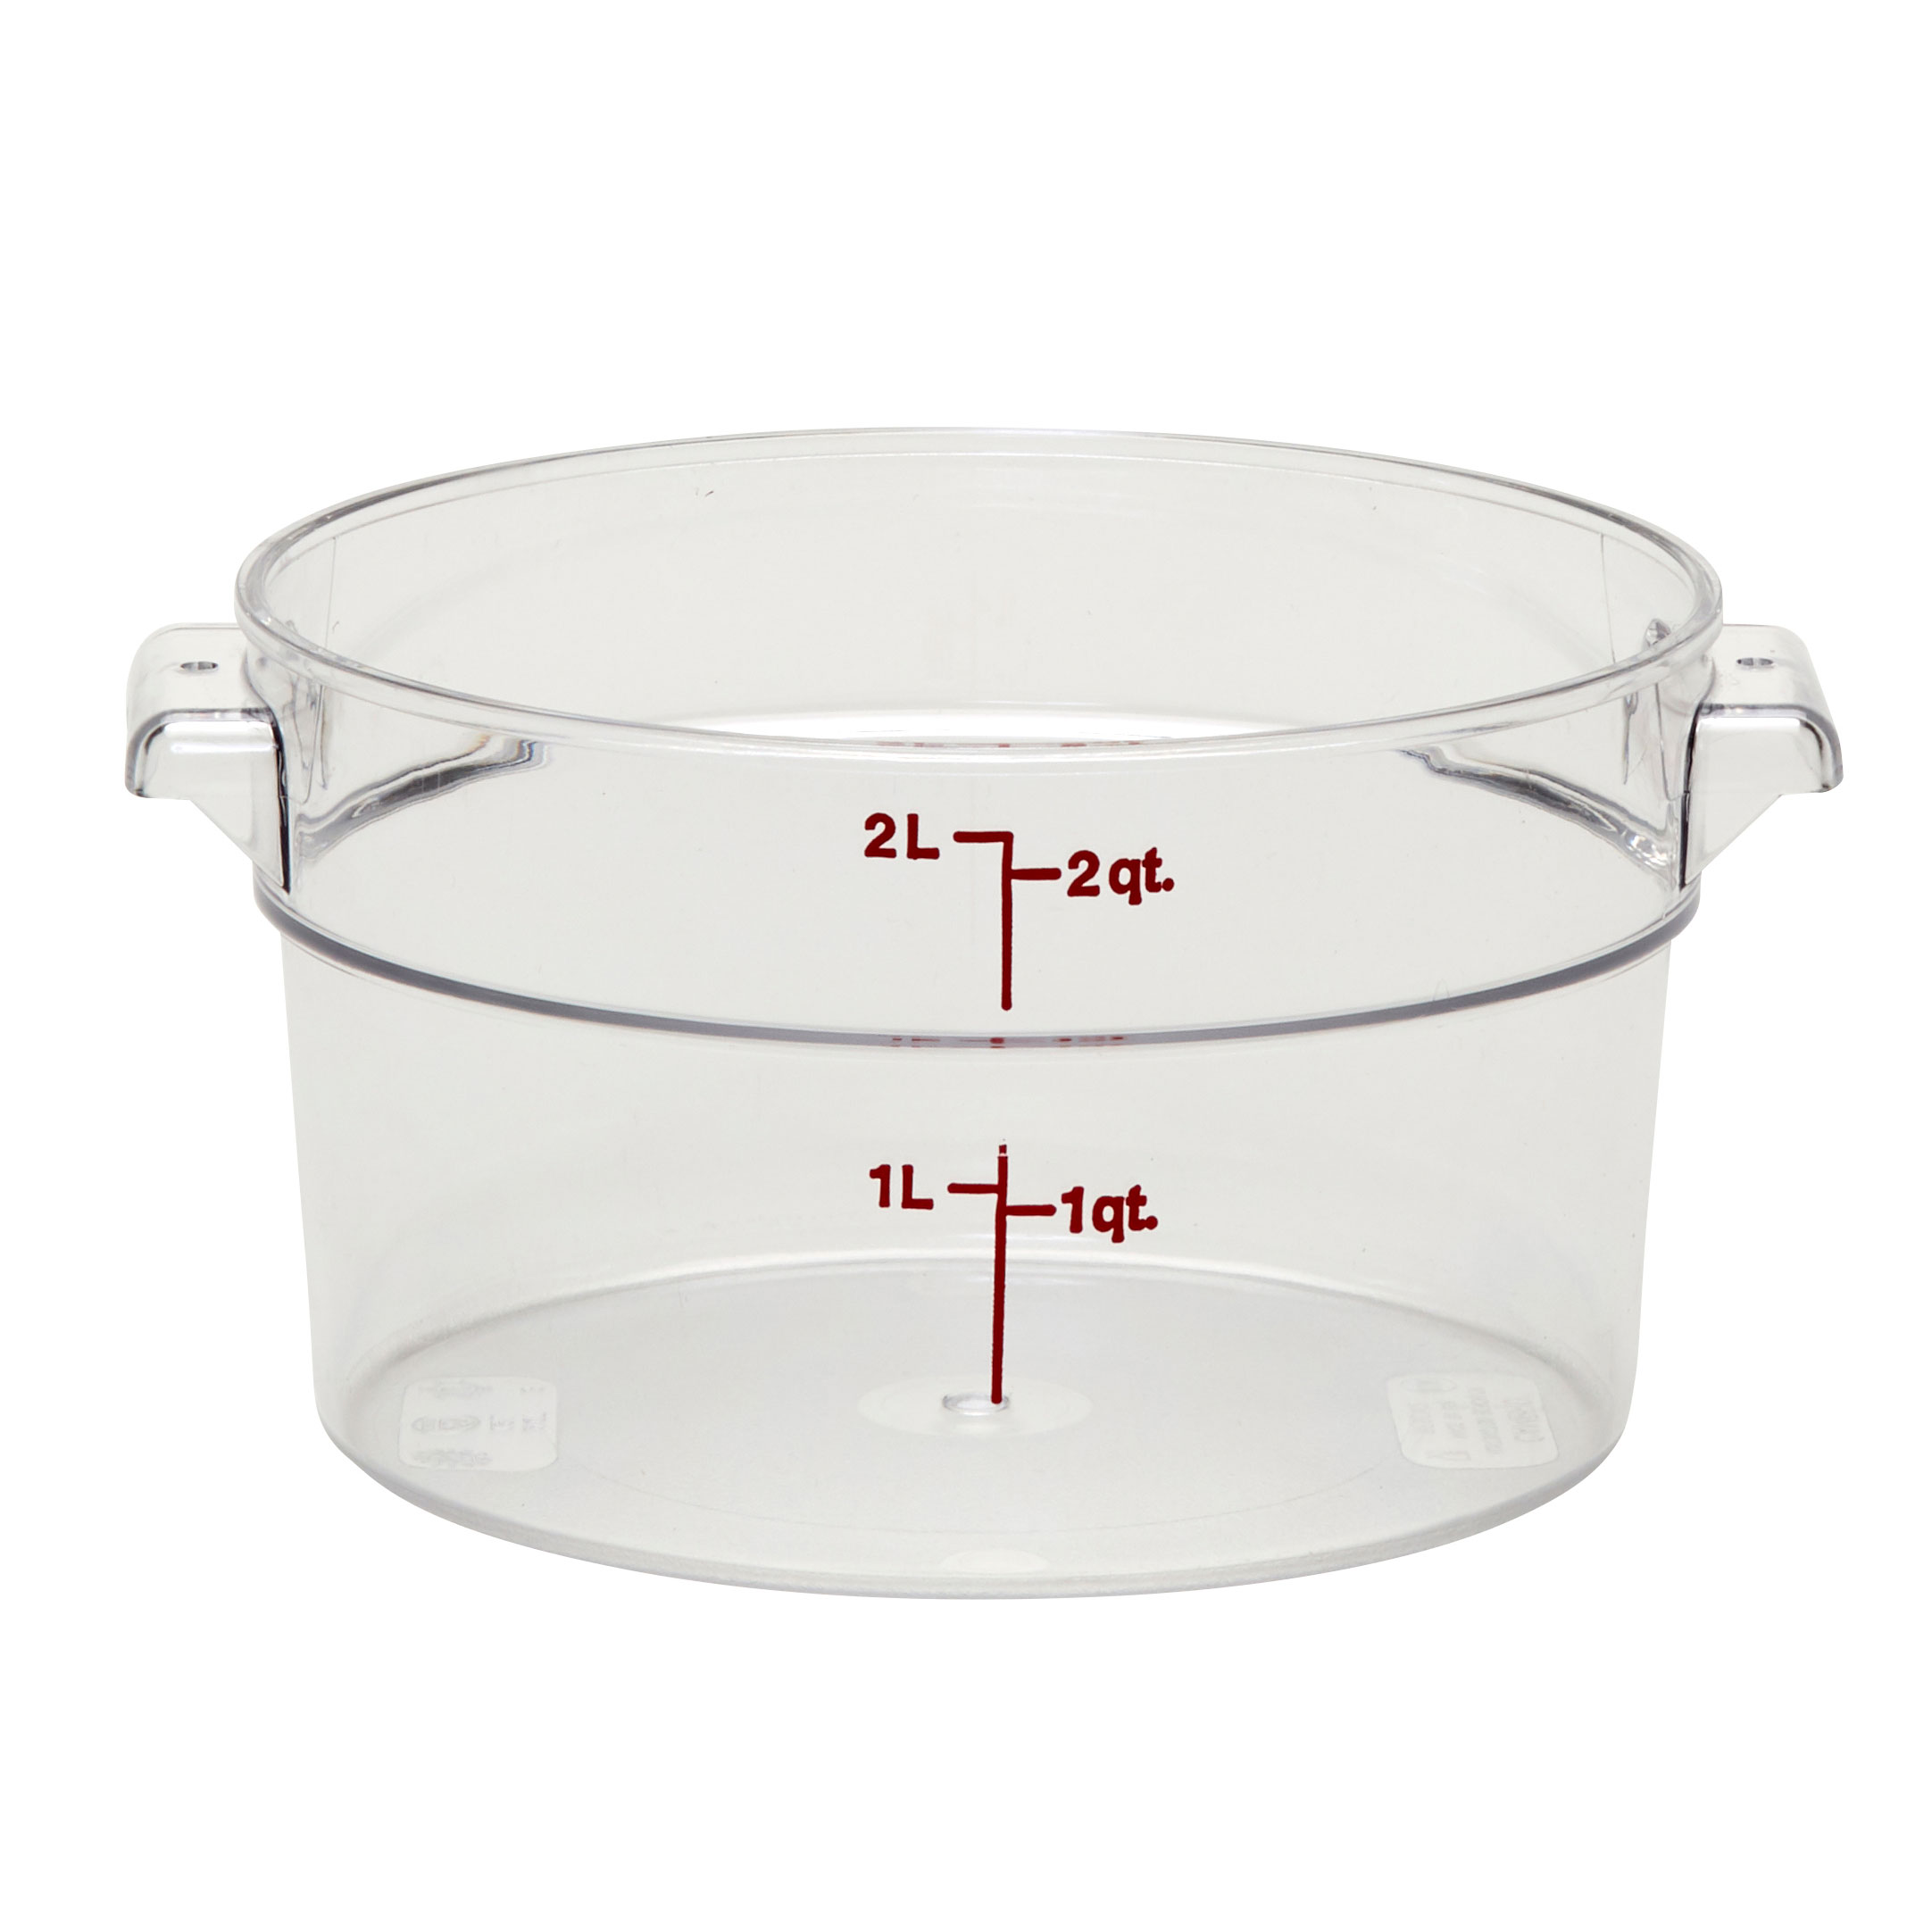 2qt. CLEAR ROUND FOOD STORAGE
CONTAINER, EACH 4/22